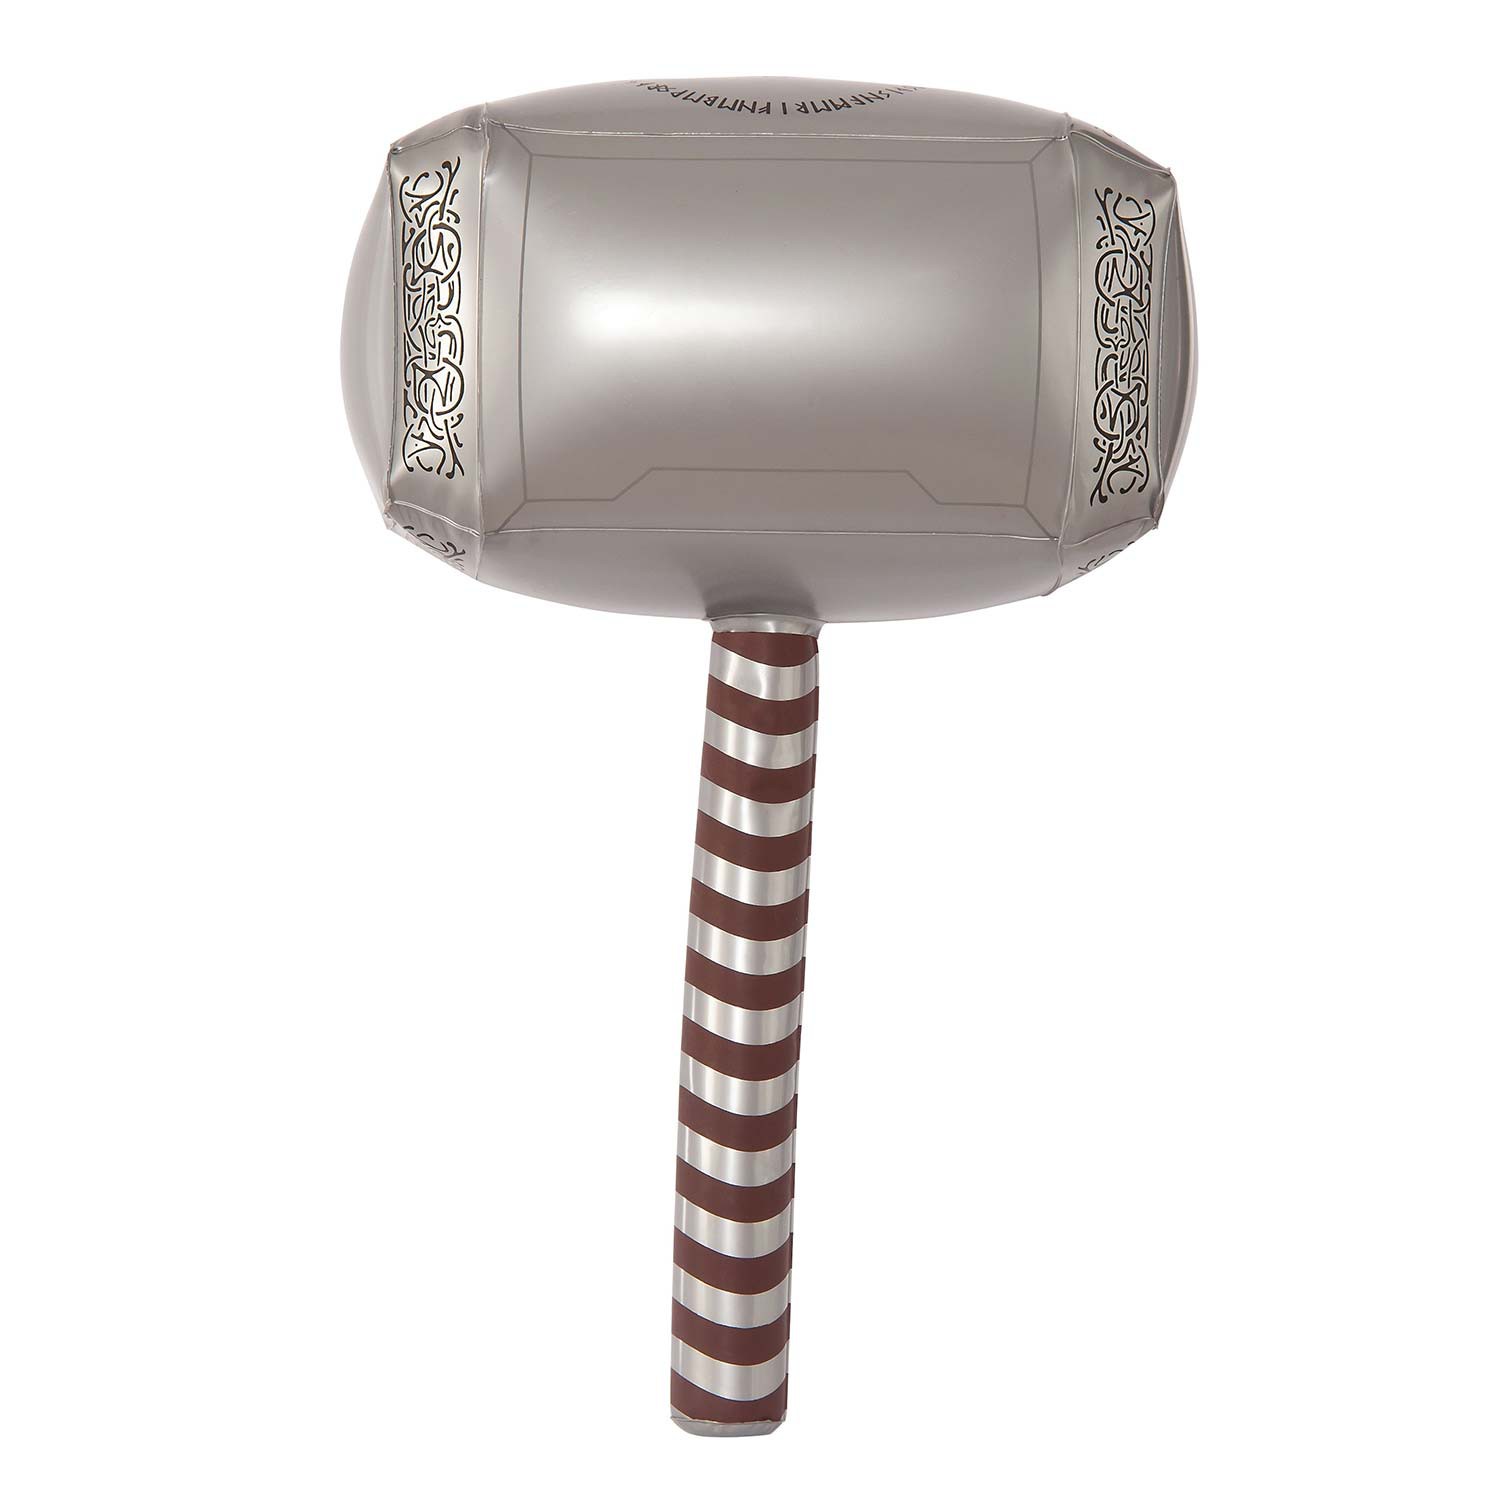 Thor Inflatable Hammer